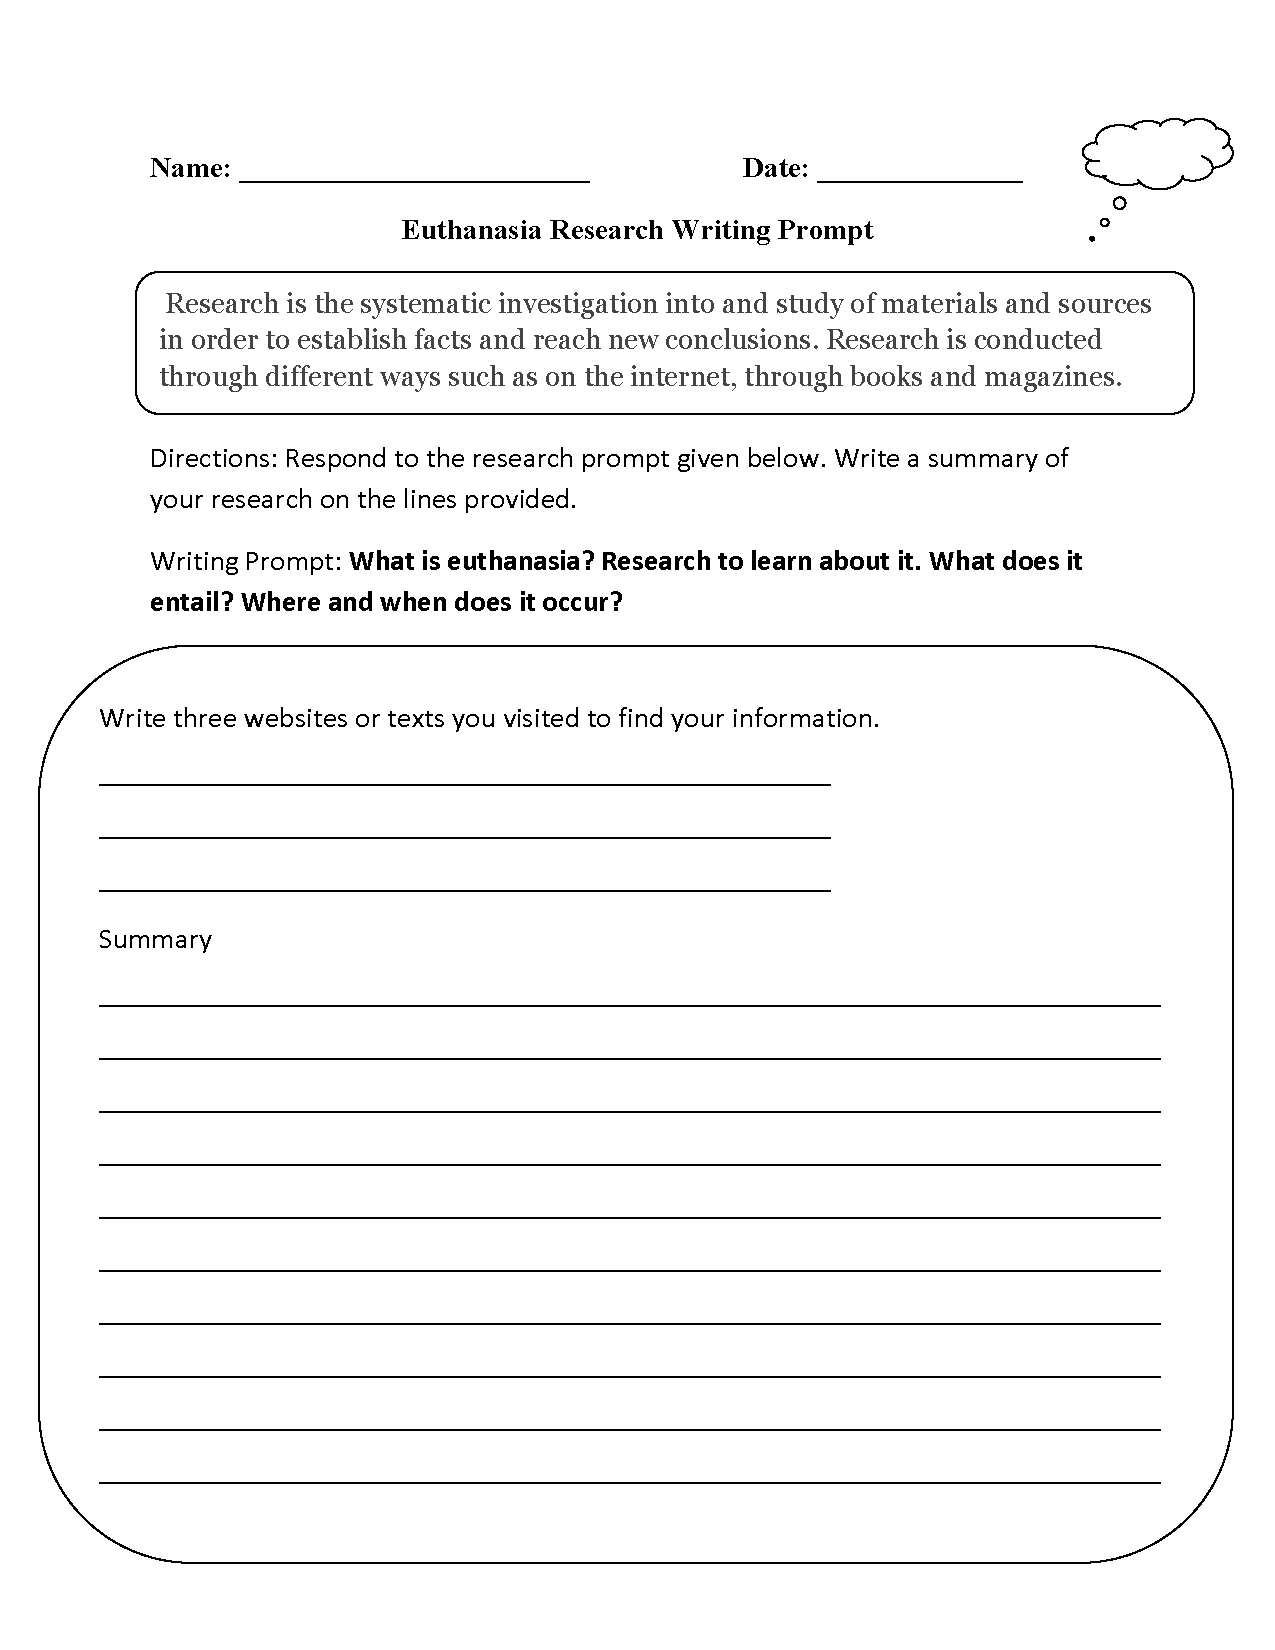 Euthanasia Research Writing Prompts Worksheet